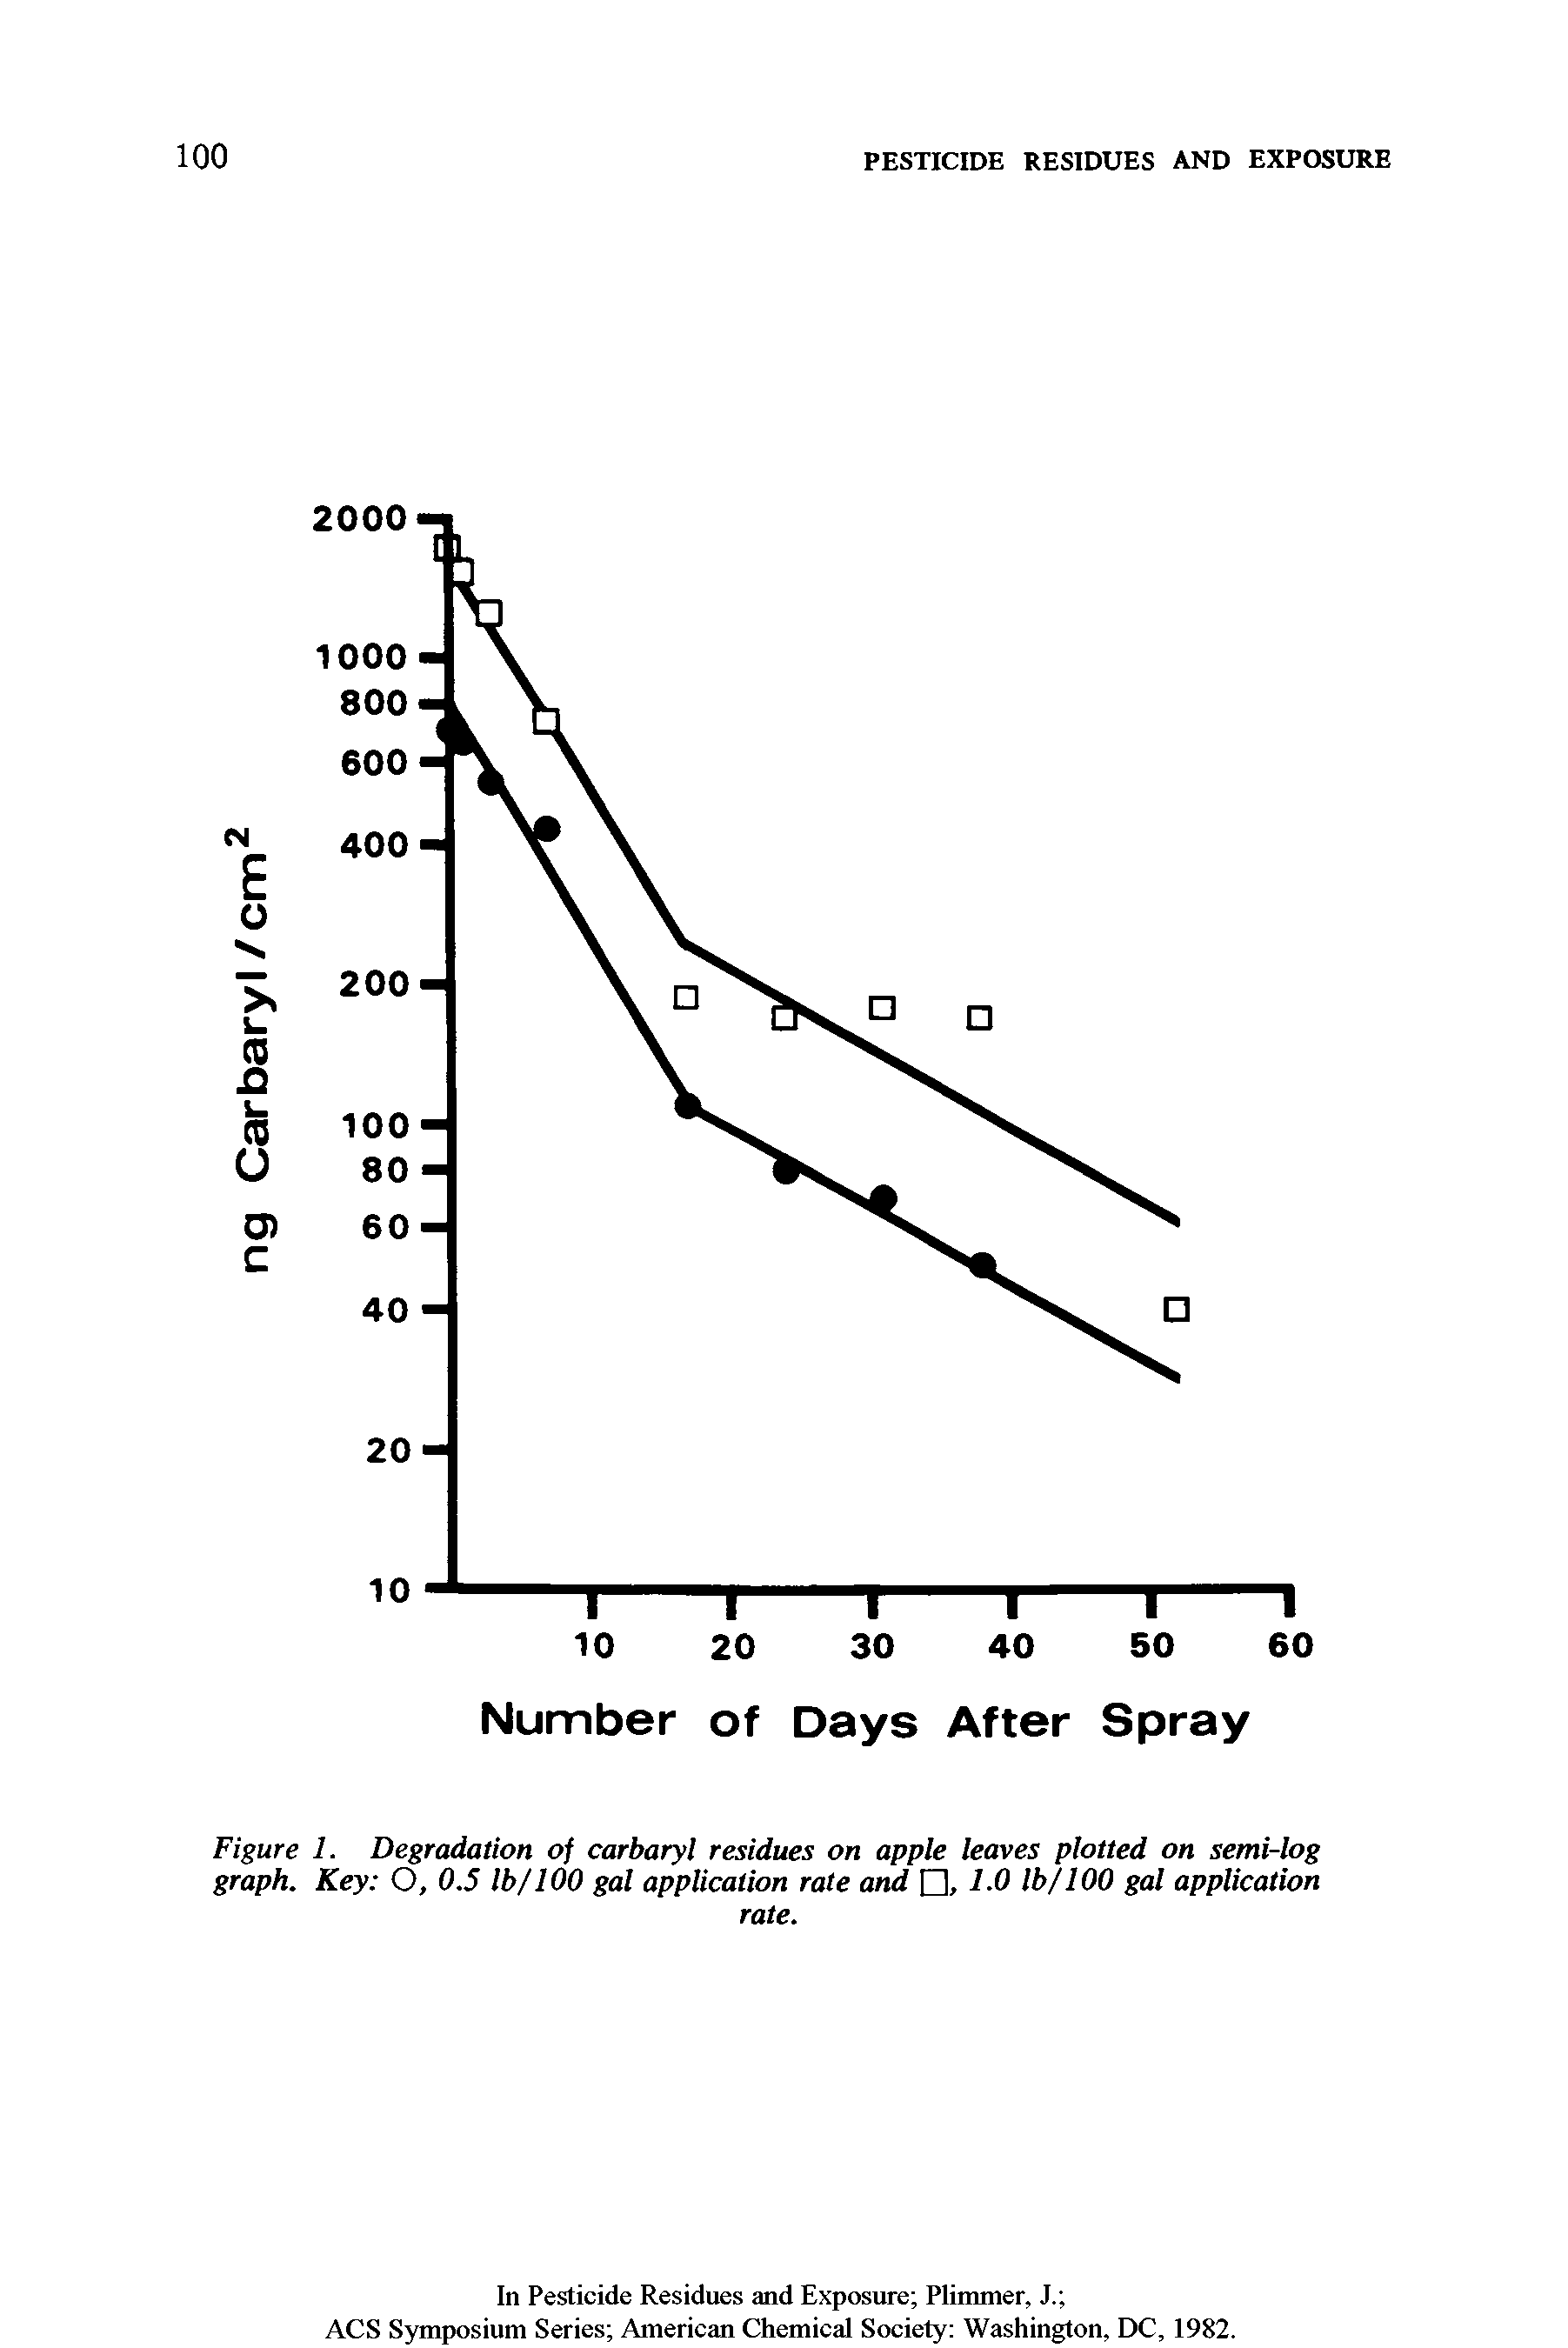 Figure 1. Degradation of carbaryl residues on apple leaves plotted on semi-log graph. Key O, 0.5 lb/100 gal application rate and , 1.0 lb/100 gal application...